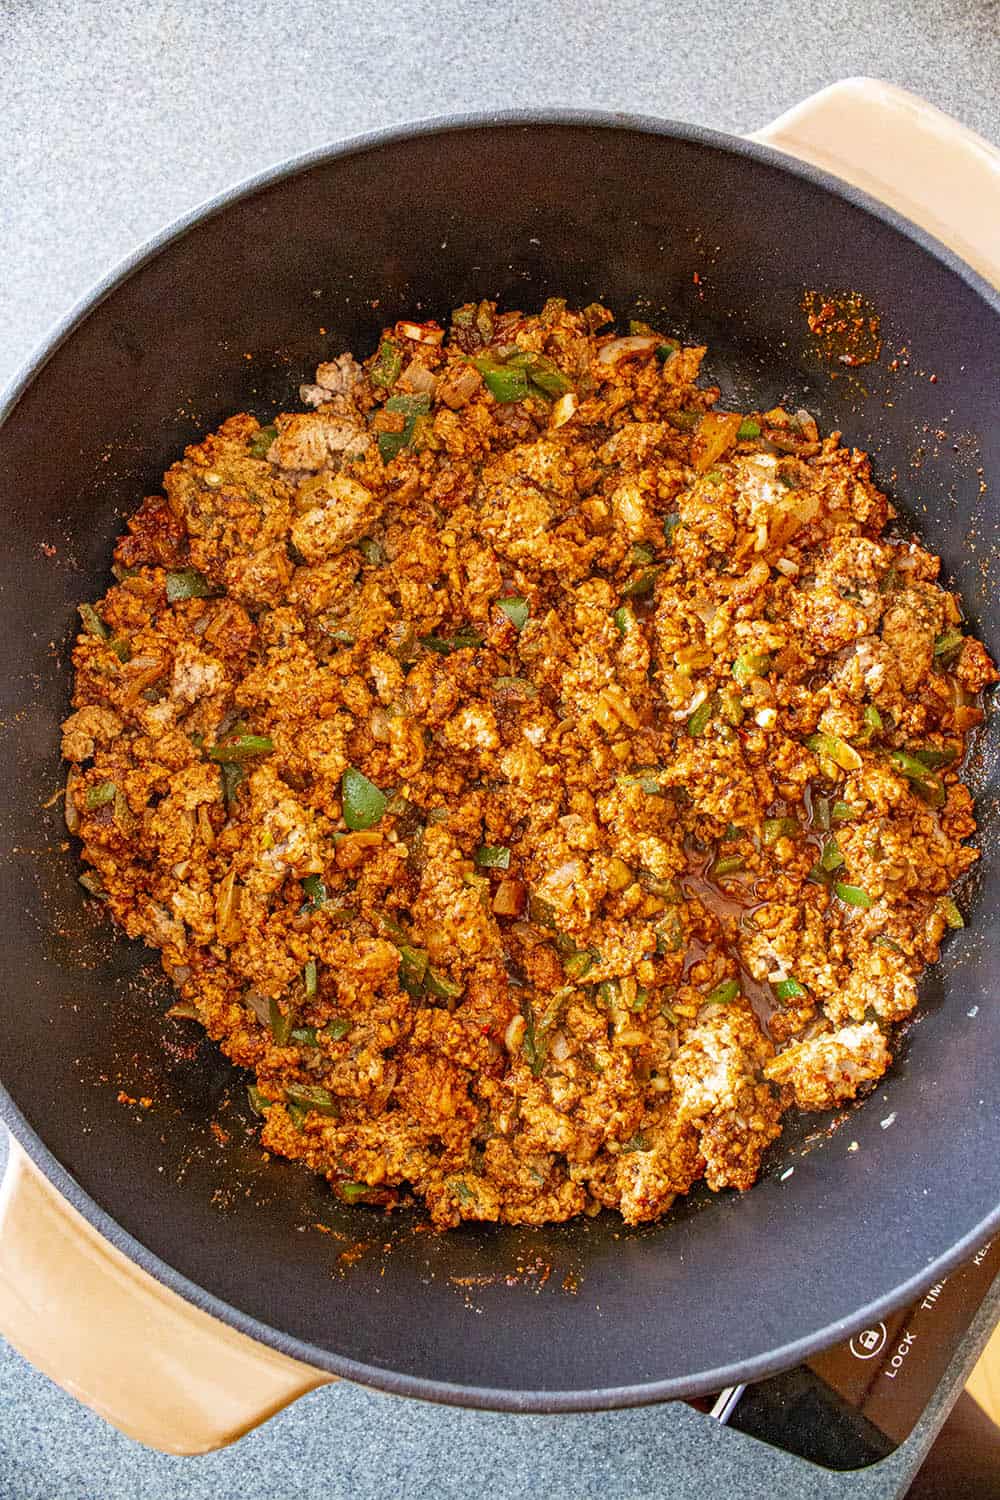 Seasoning added to the ground meat in the pan